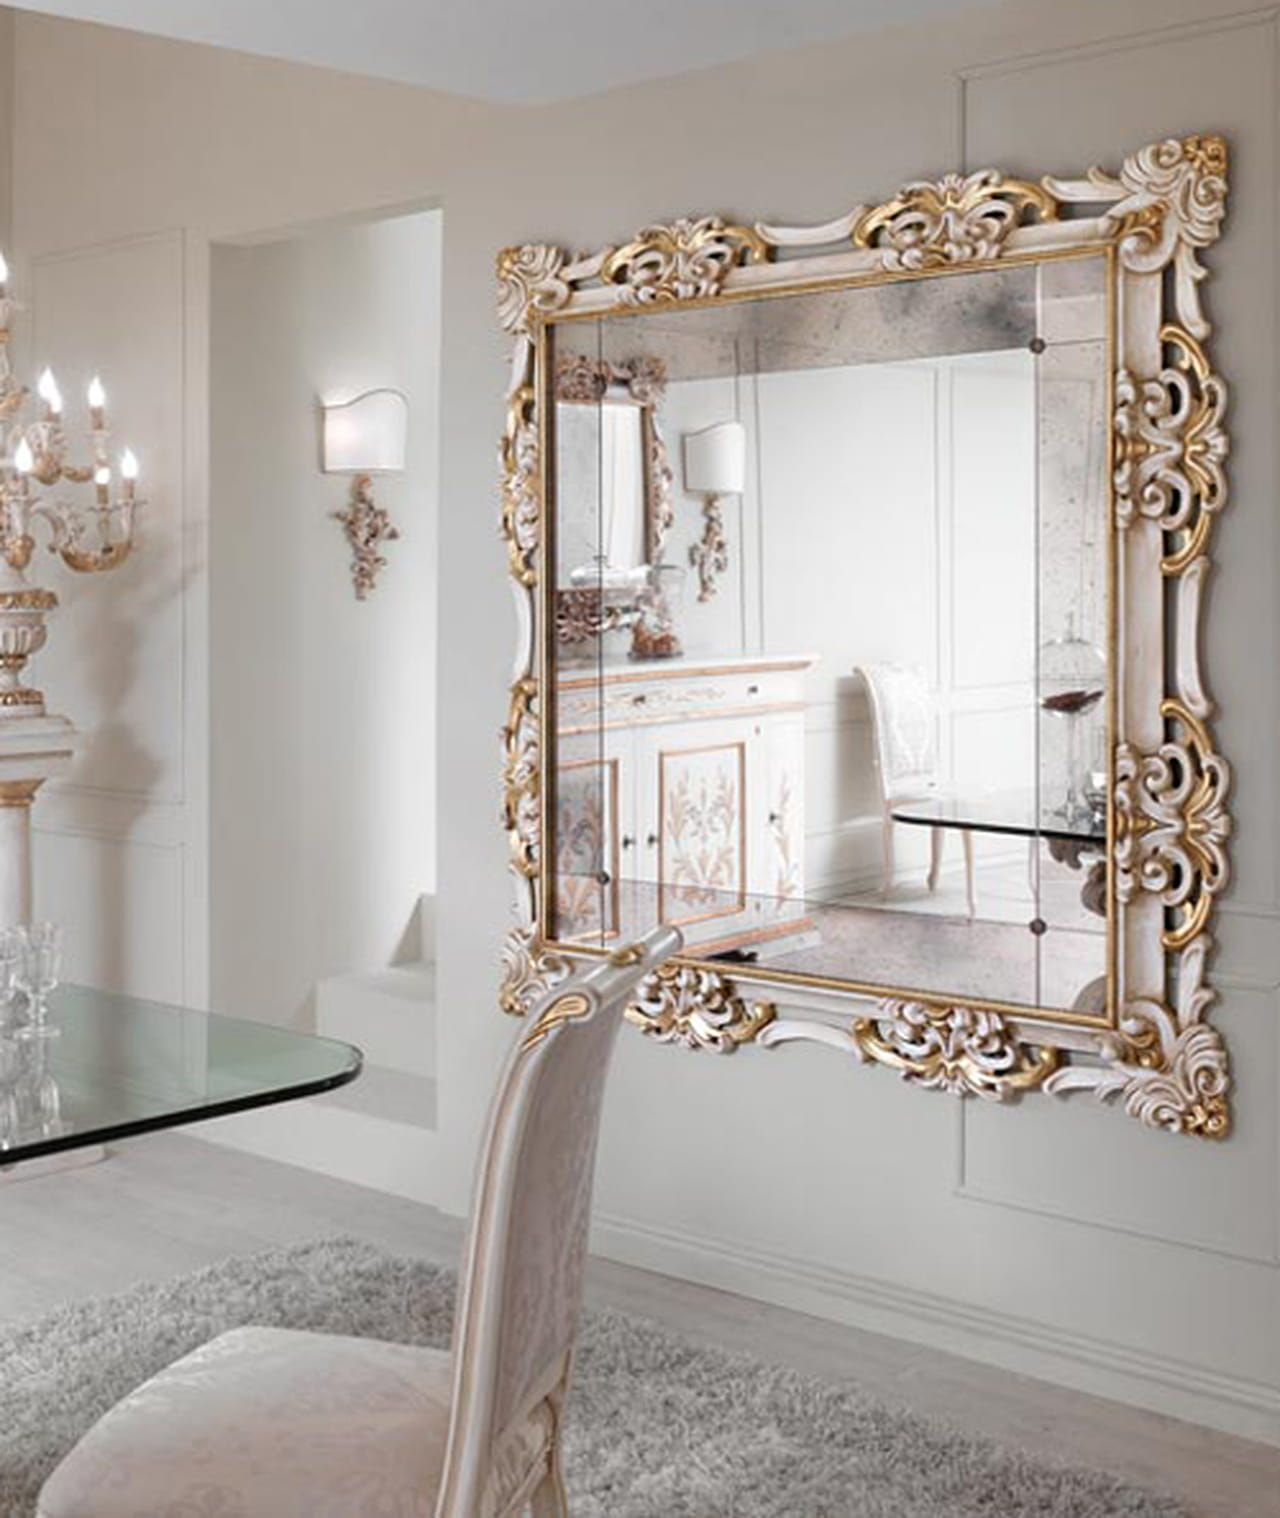 Large Living Room Mirrors You Ll Love, Big Wall Mirror Design For Living Room